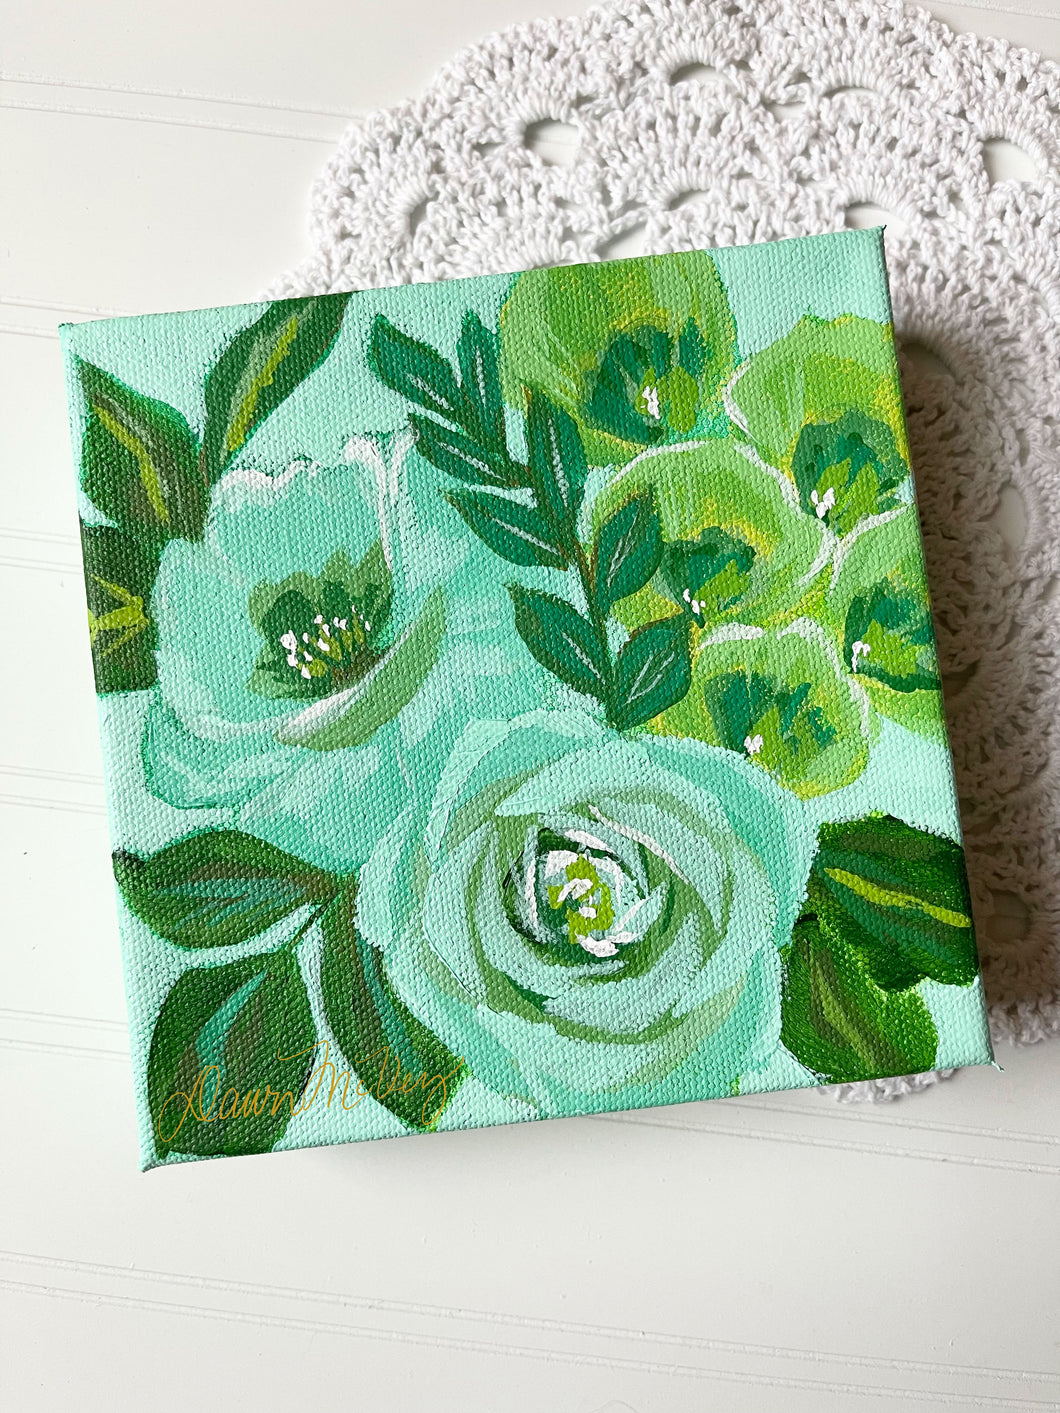 Antique Inspired - Green #1